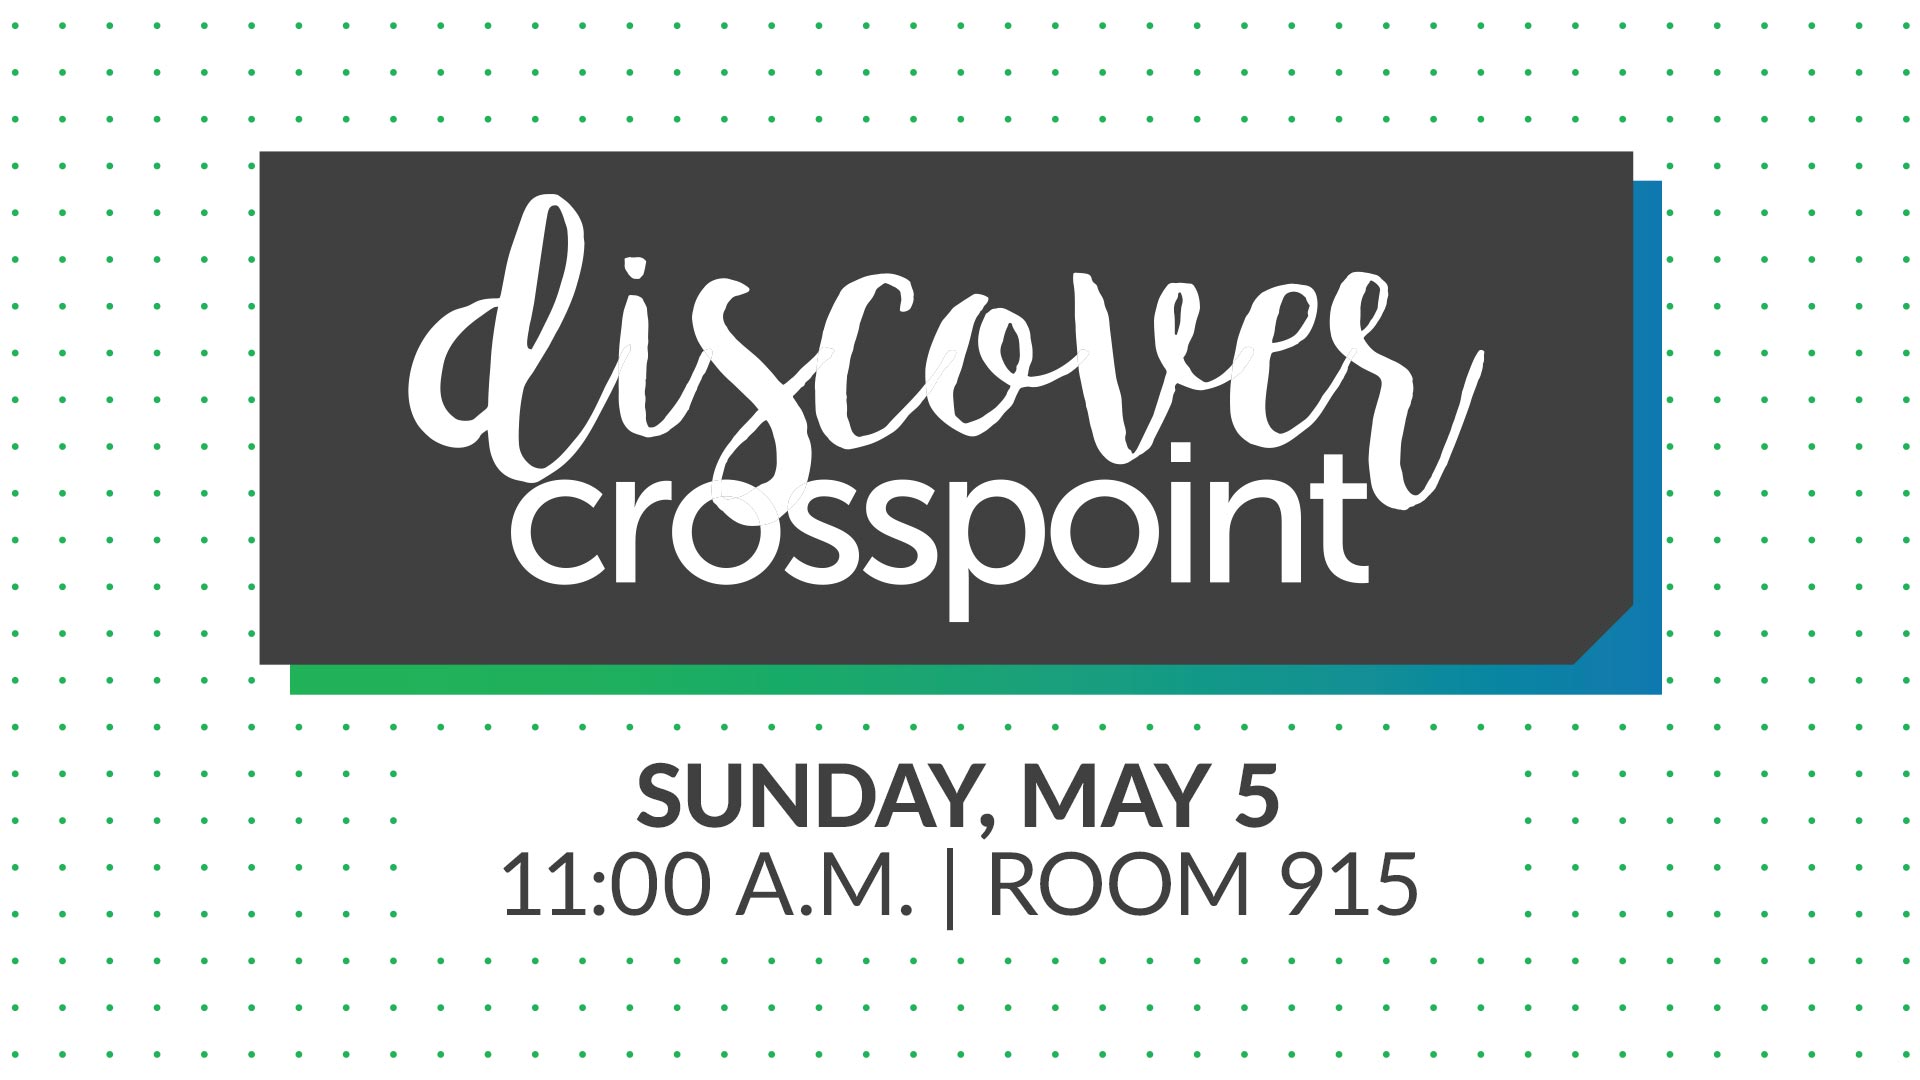 Discover Crosspoint